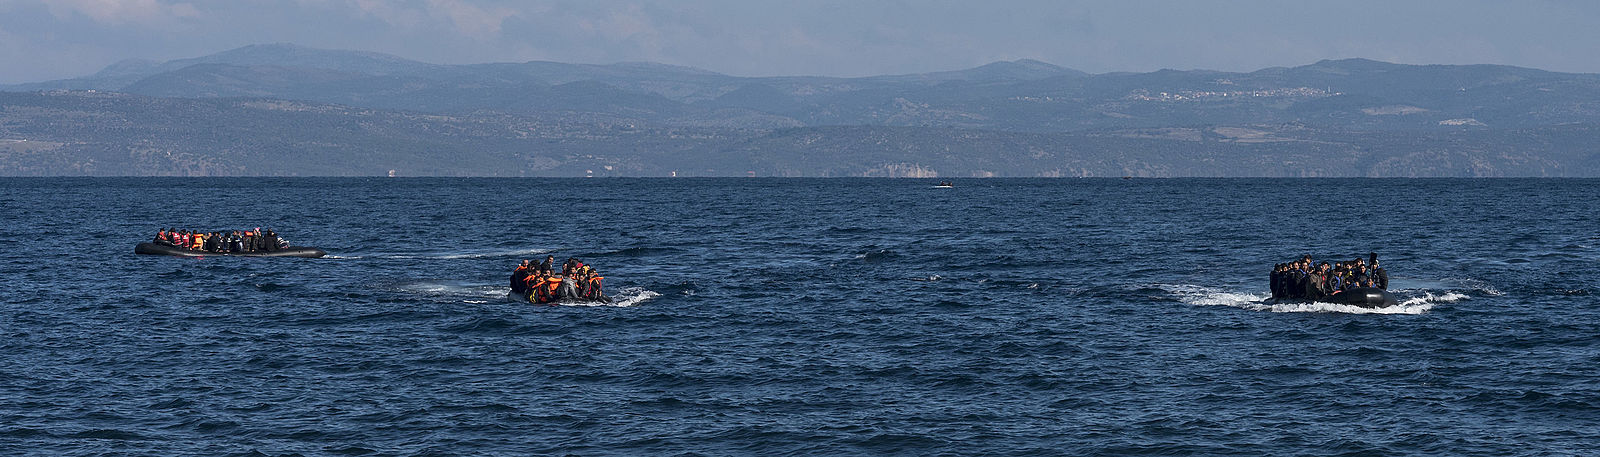 Amnesty International: Greece authorities must drop charges against migrant rescuers